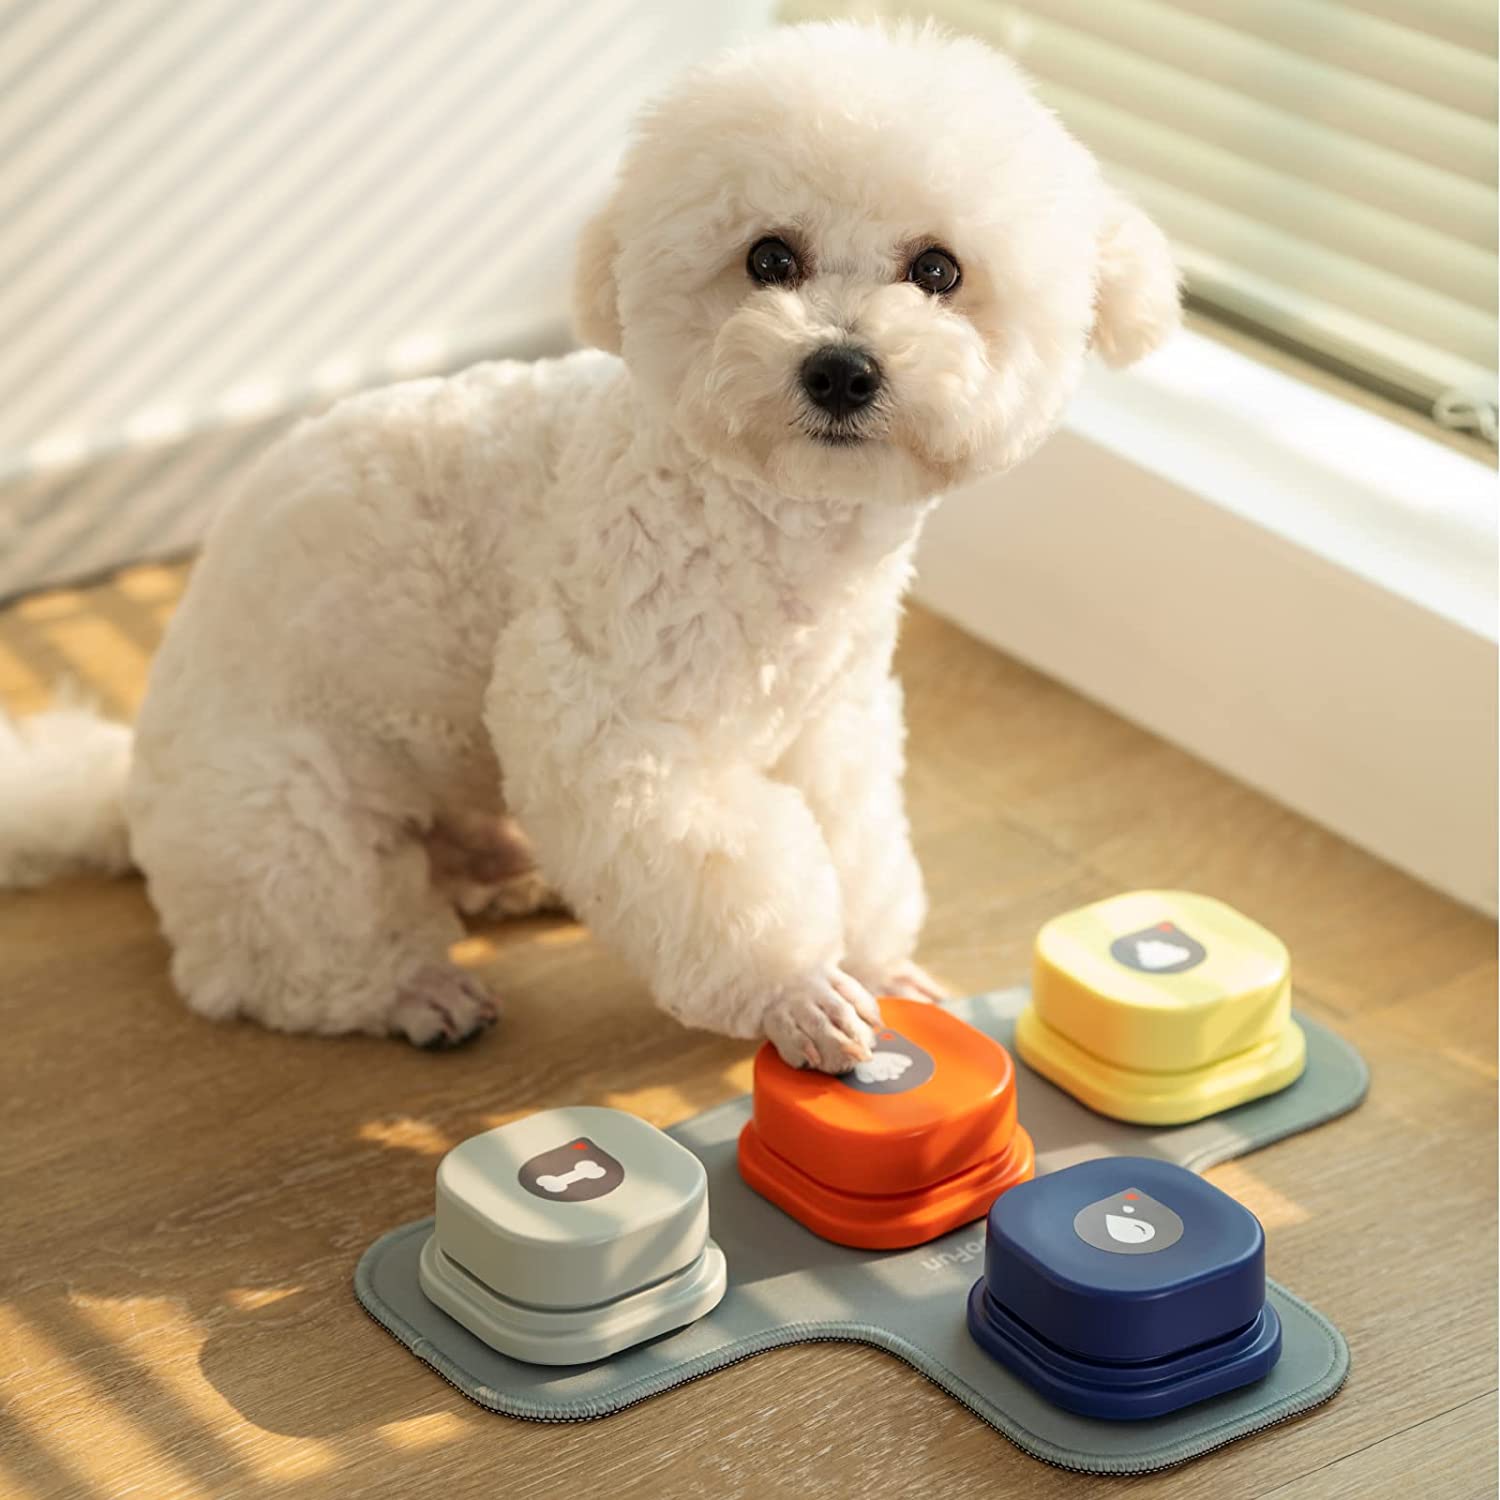 Interactive Voice-Recording Dog Training Buttons